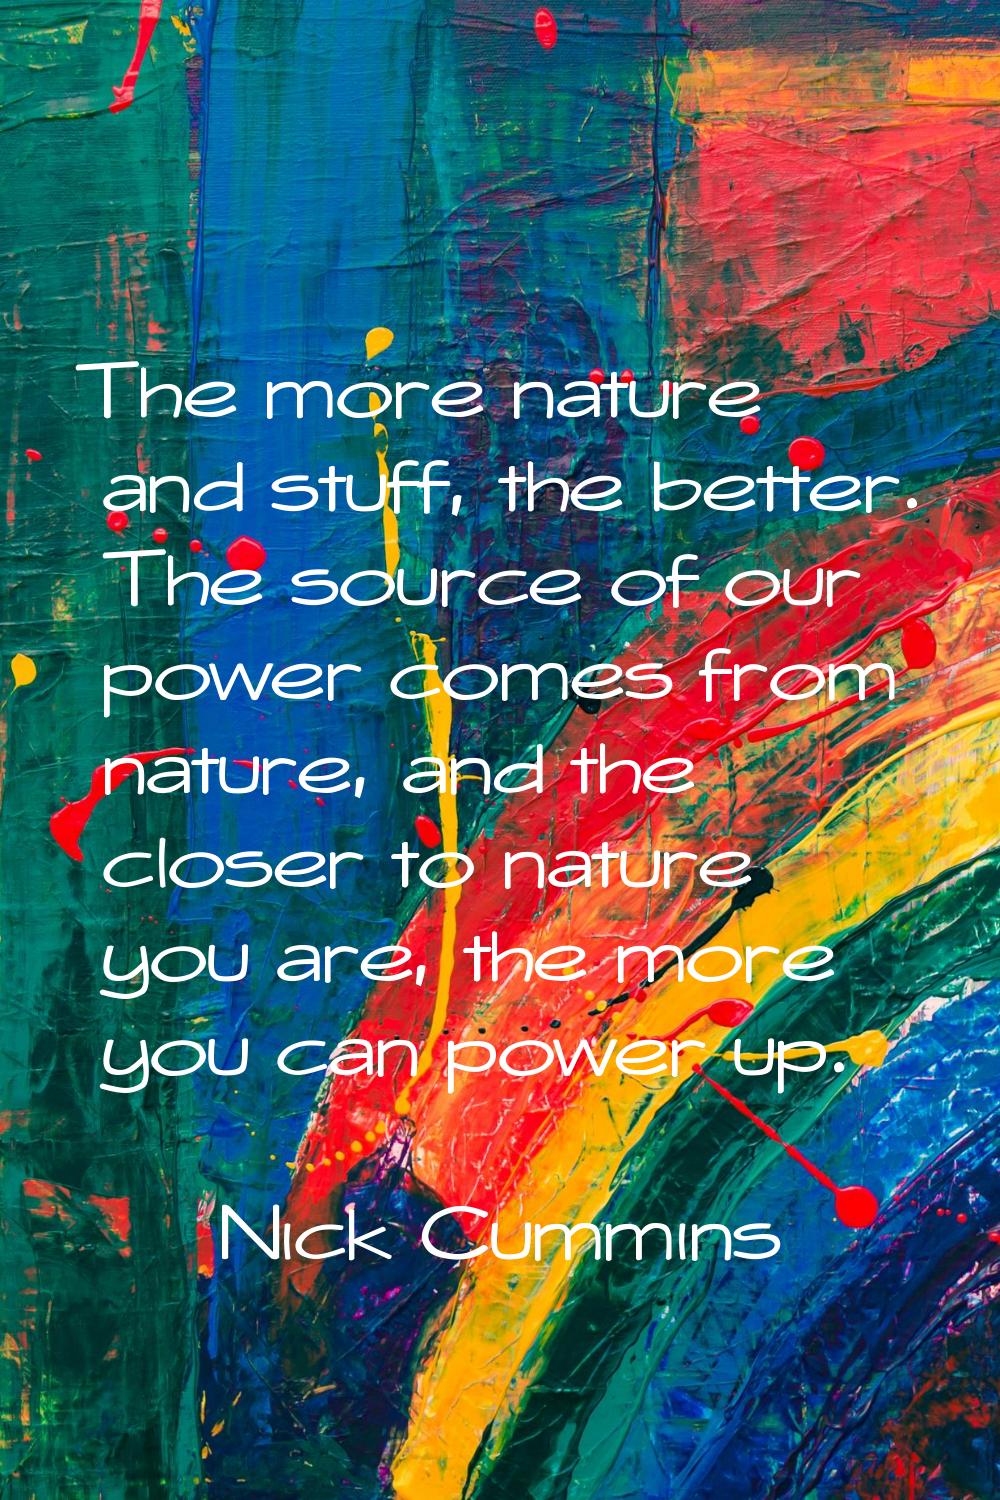 The more nature and stuff, the better. The source of our power comes from nature, and the closer to